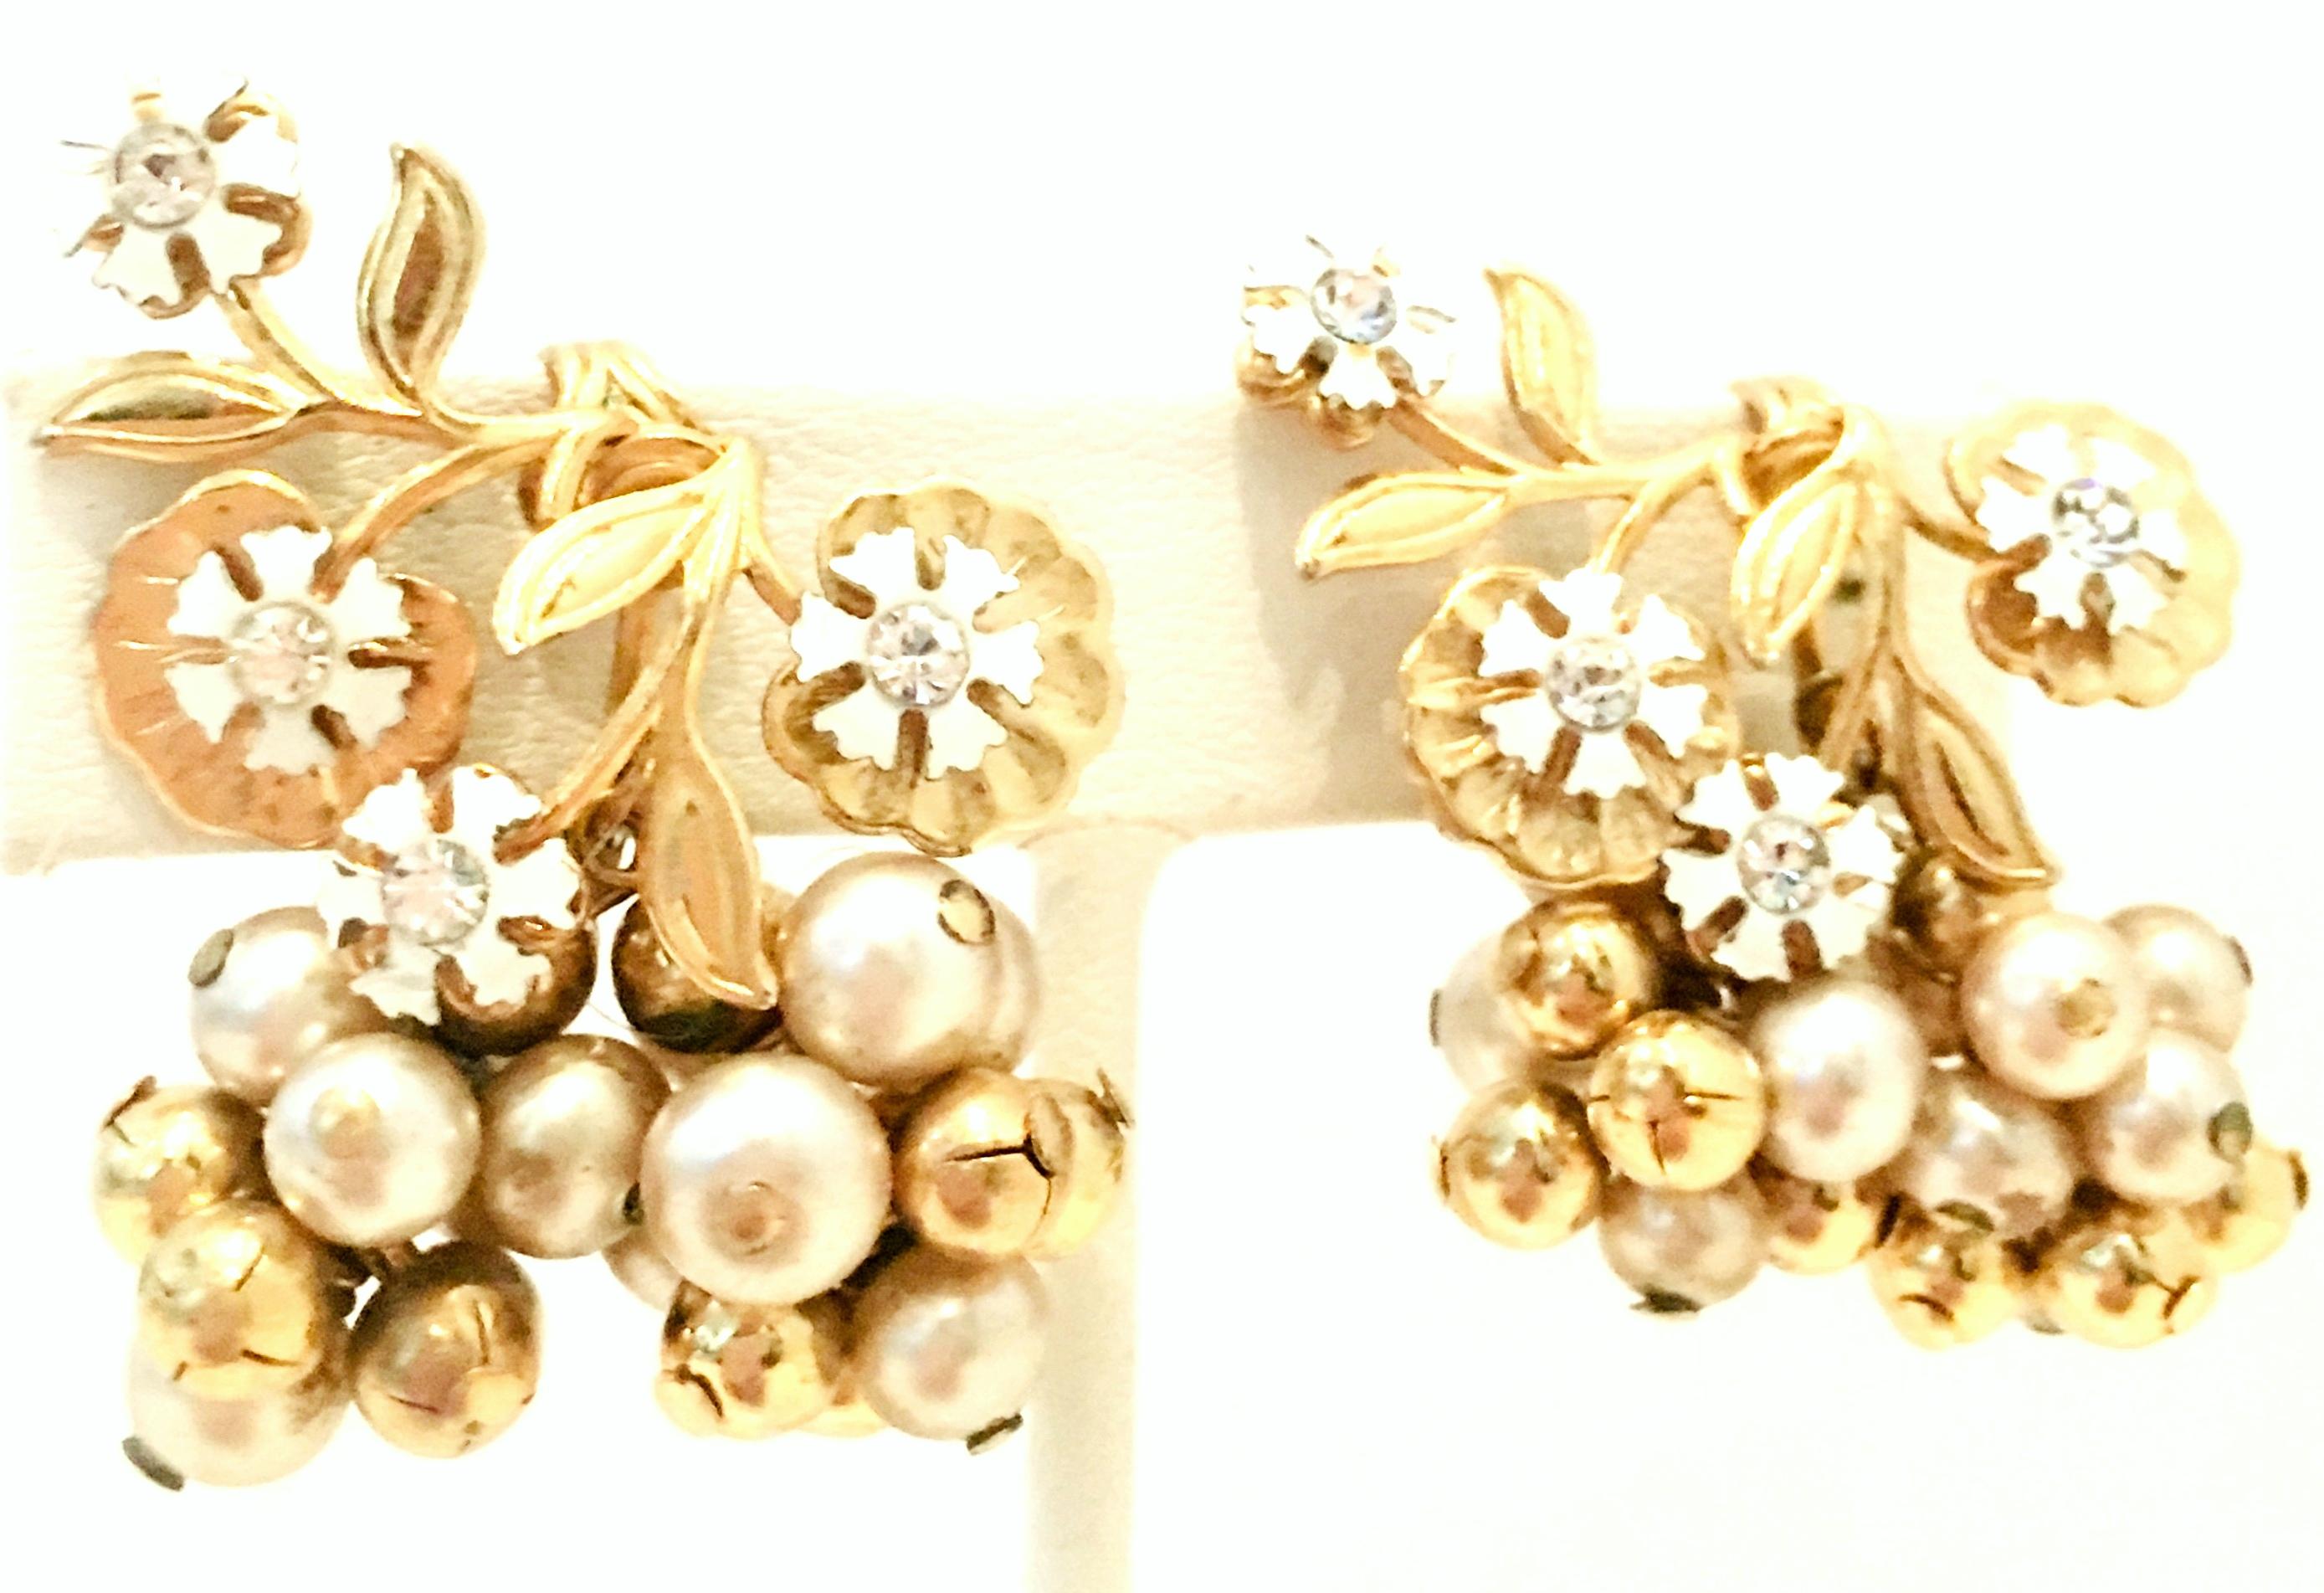 20th Century Pair Of Gold, Enamel, Austrian Crystal & Faux Pearl Dangle Earrings. These unique clip style dangle earrings feature gold plate metal with white enamel flowers, colorless Austrian crystal stones and faux pearl beads. The faux pearls are